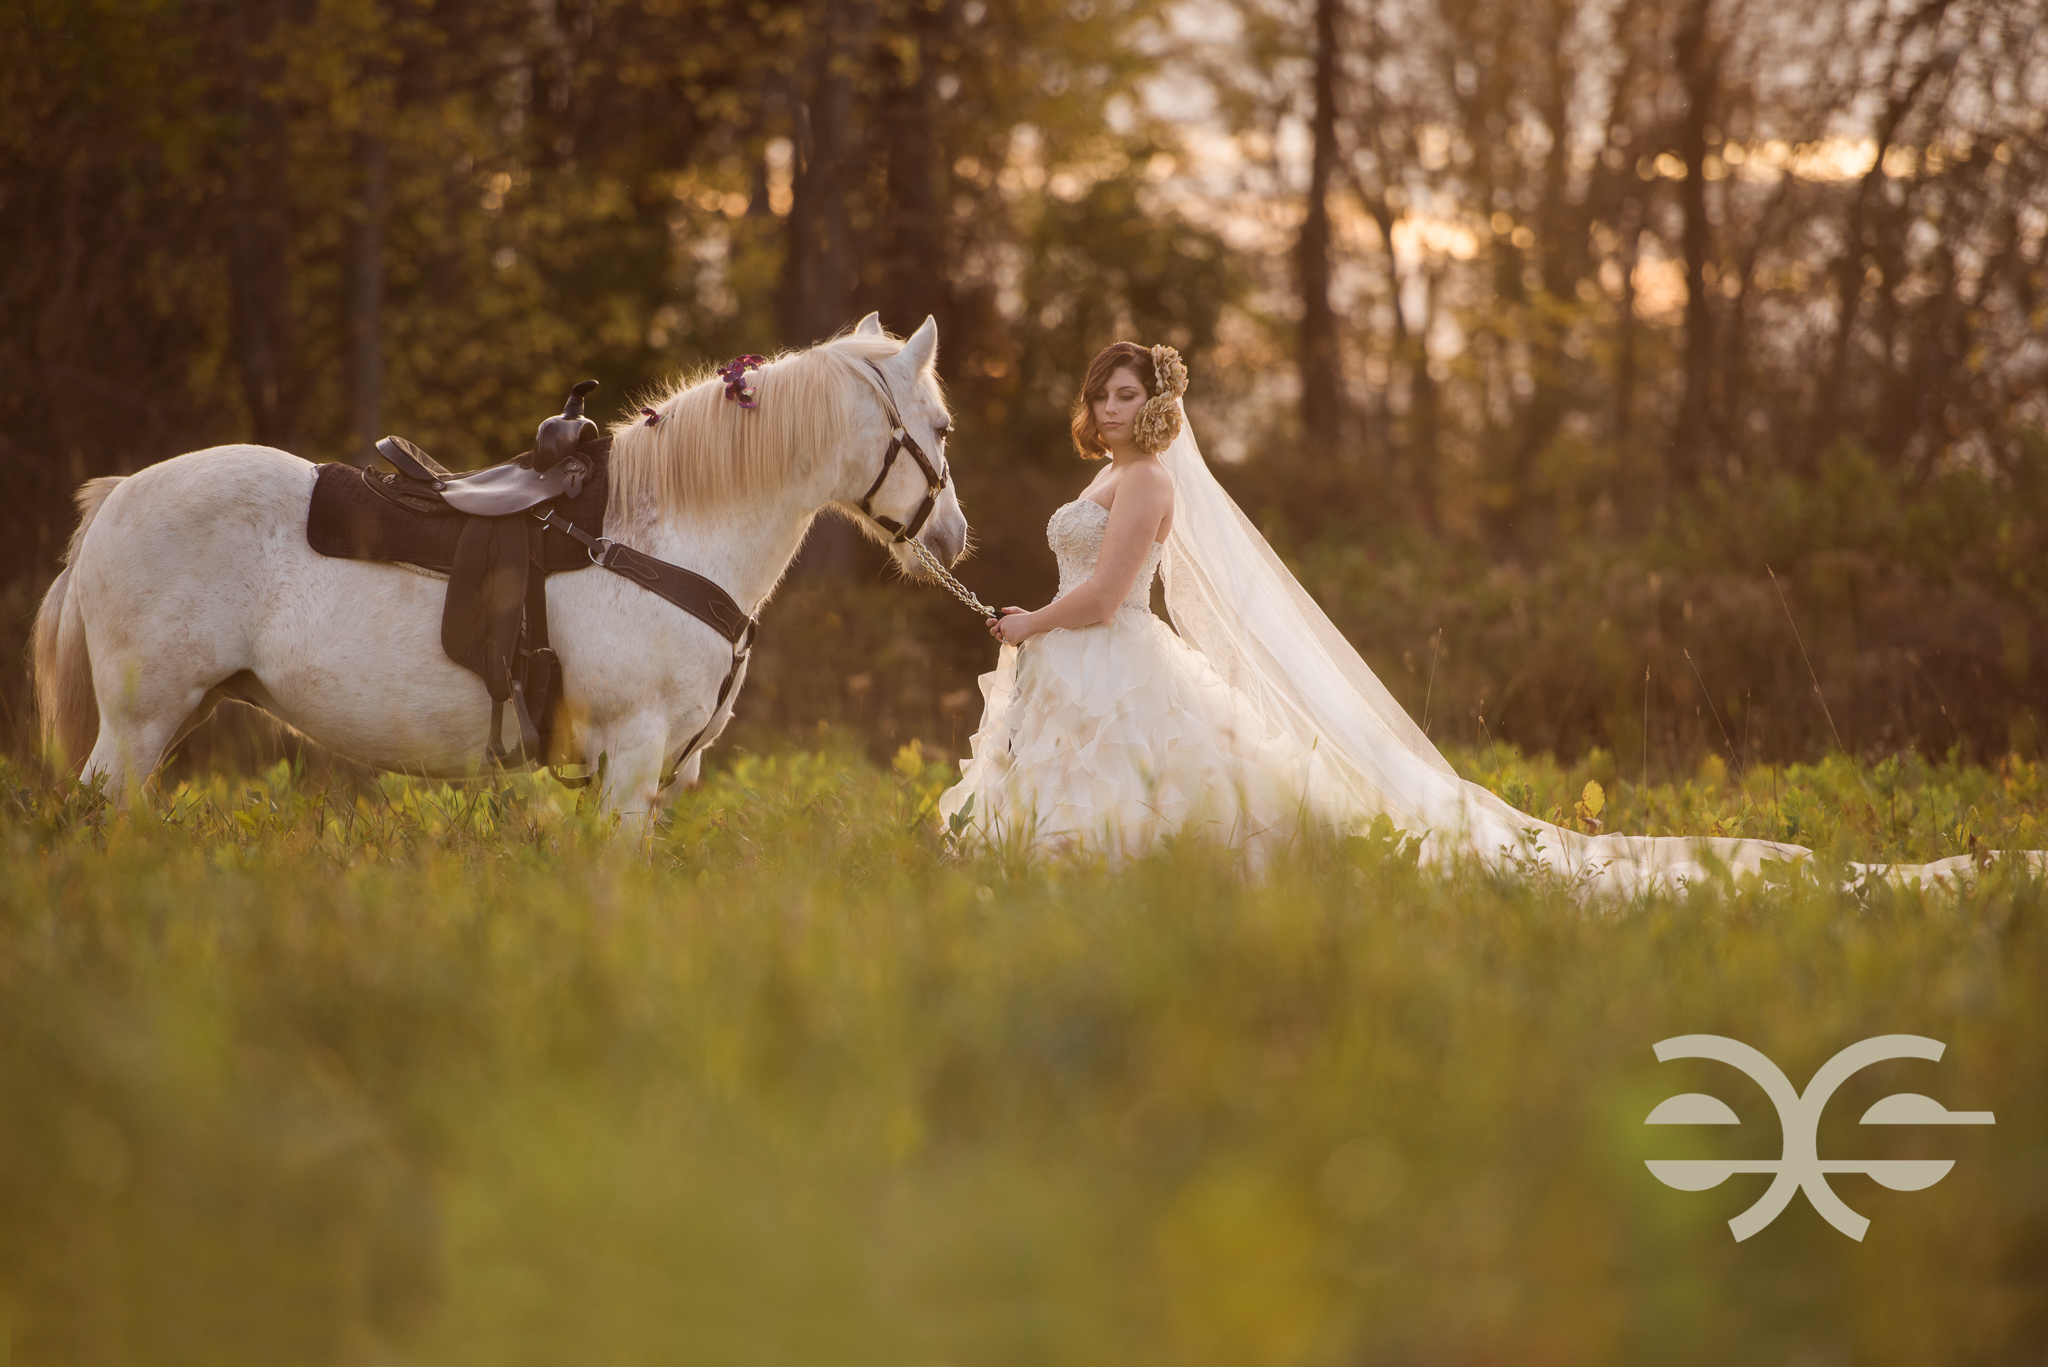 A bride and her horse in Buffalo, NY